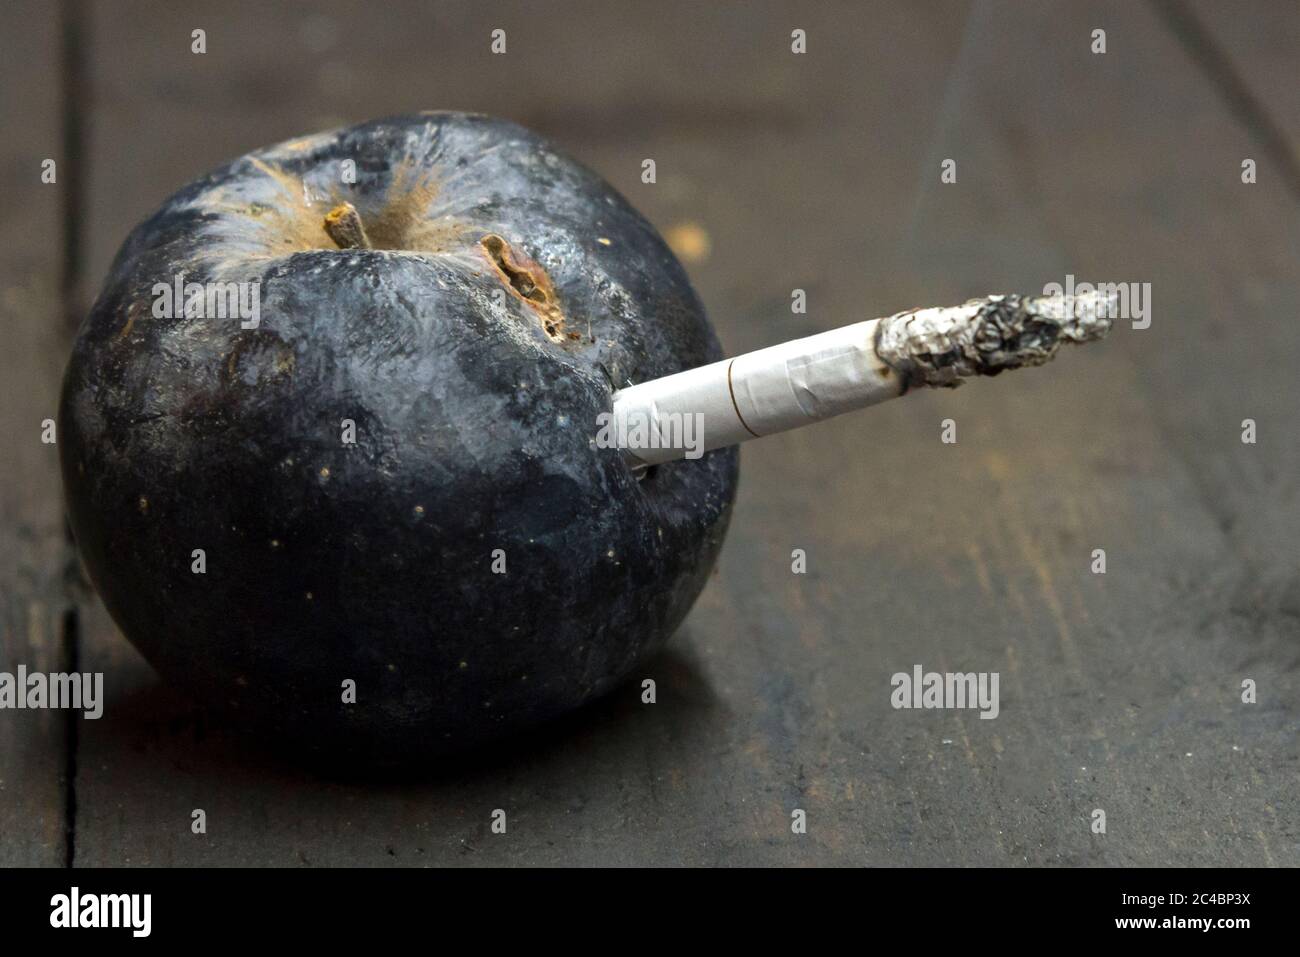 Cigarette inserted in a rotten dried apple, the concept of harm of smoking Stock Photo